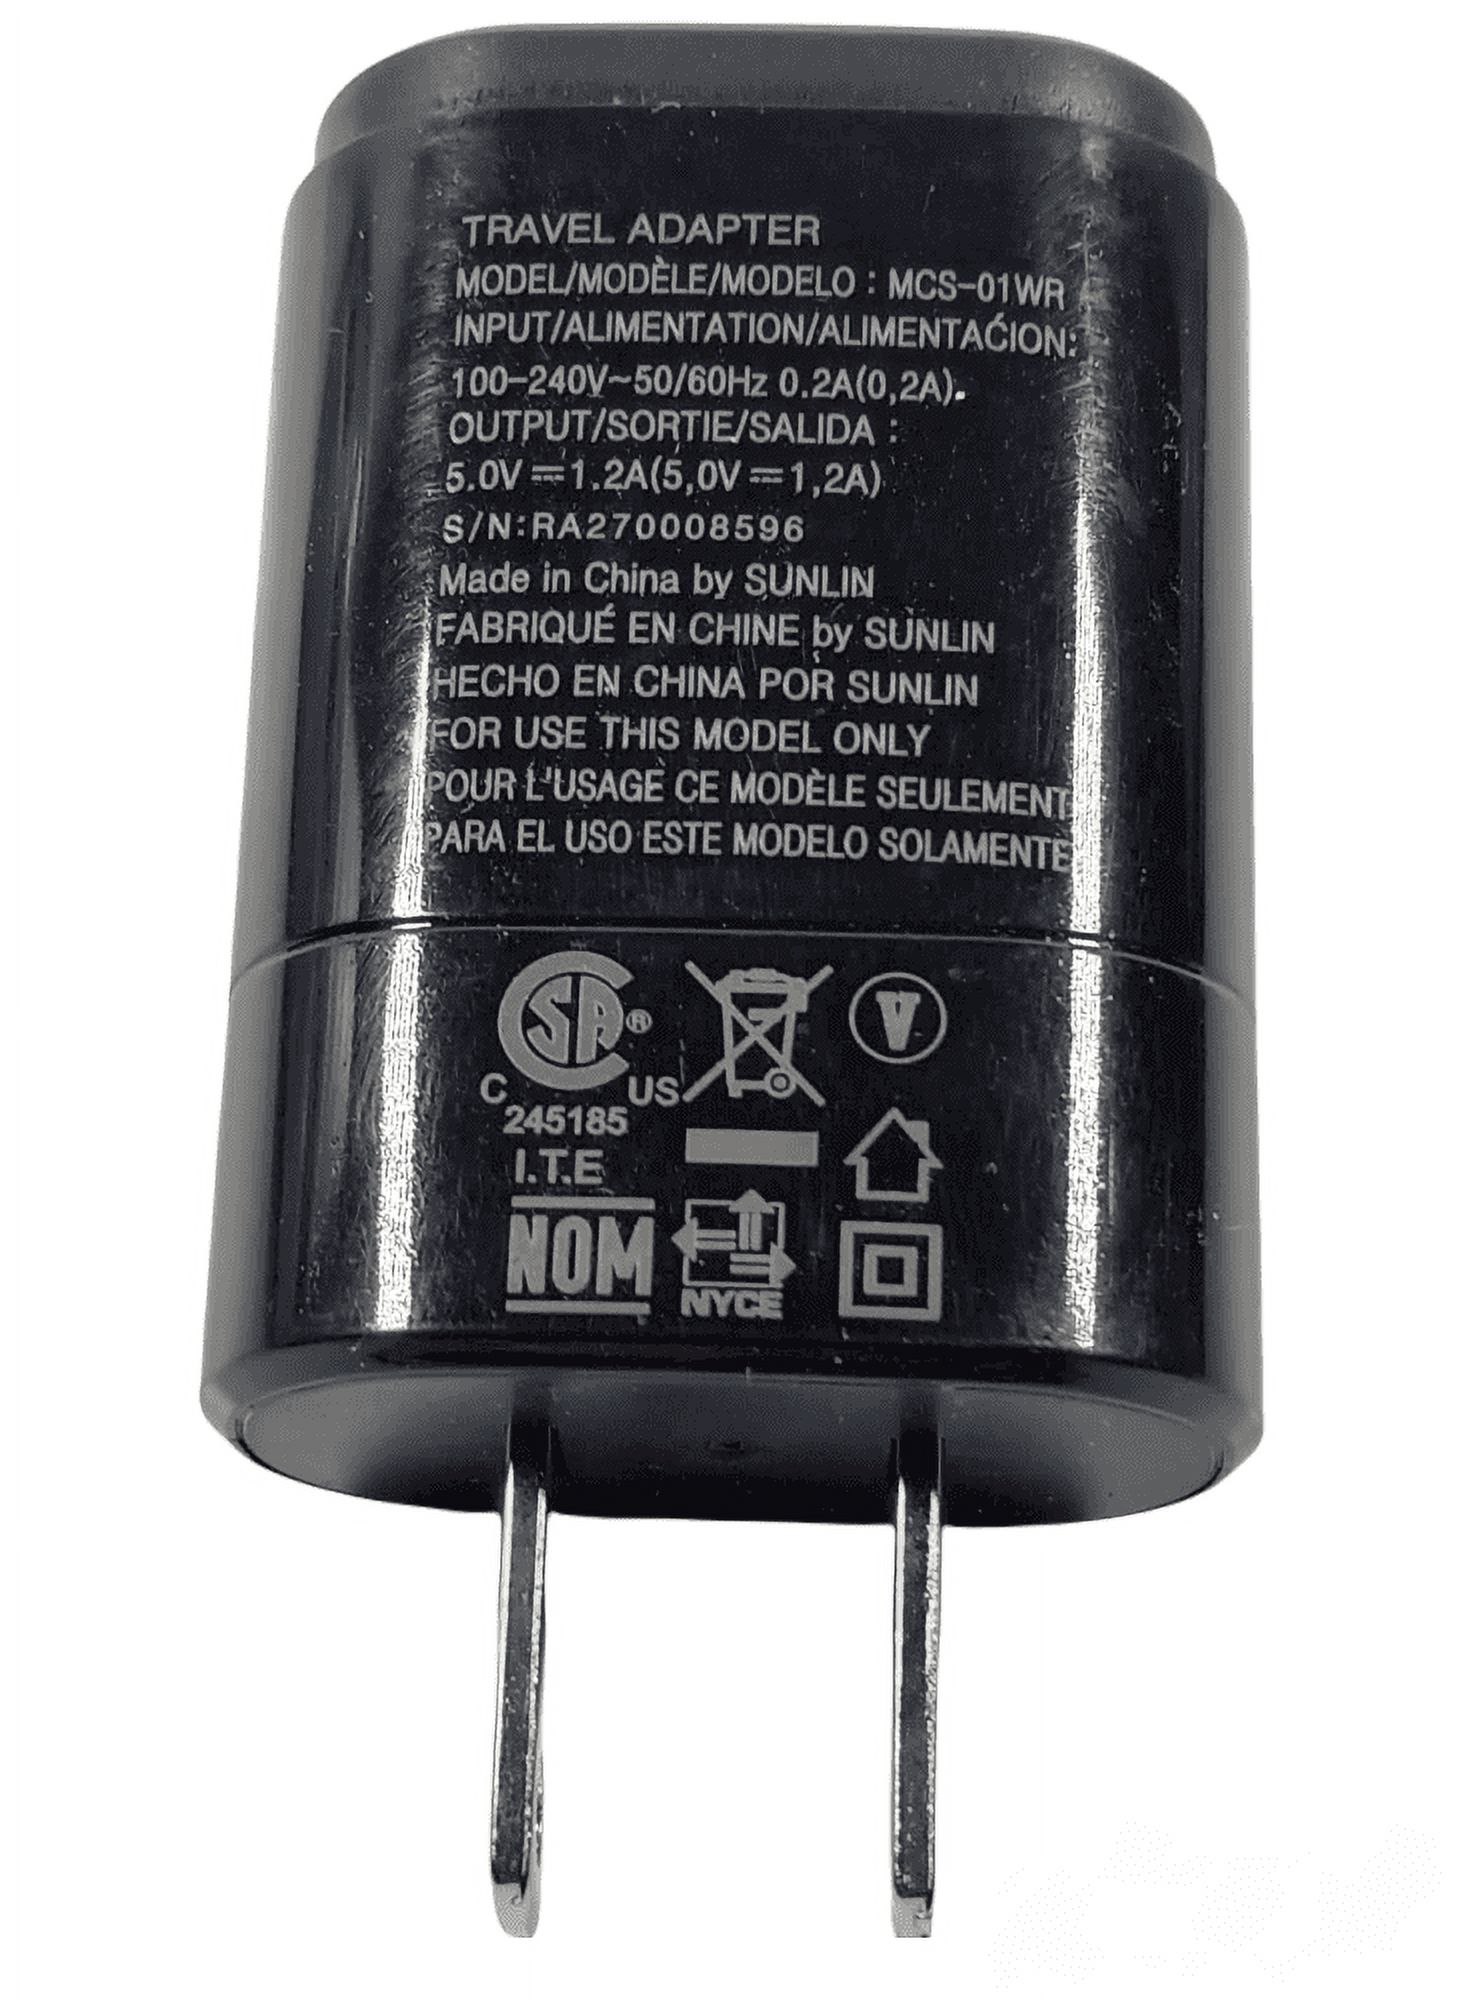 LG Universal USB AC Travel Wall Charger Power Adapter Head MCS-01WR - image 4 of 4